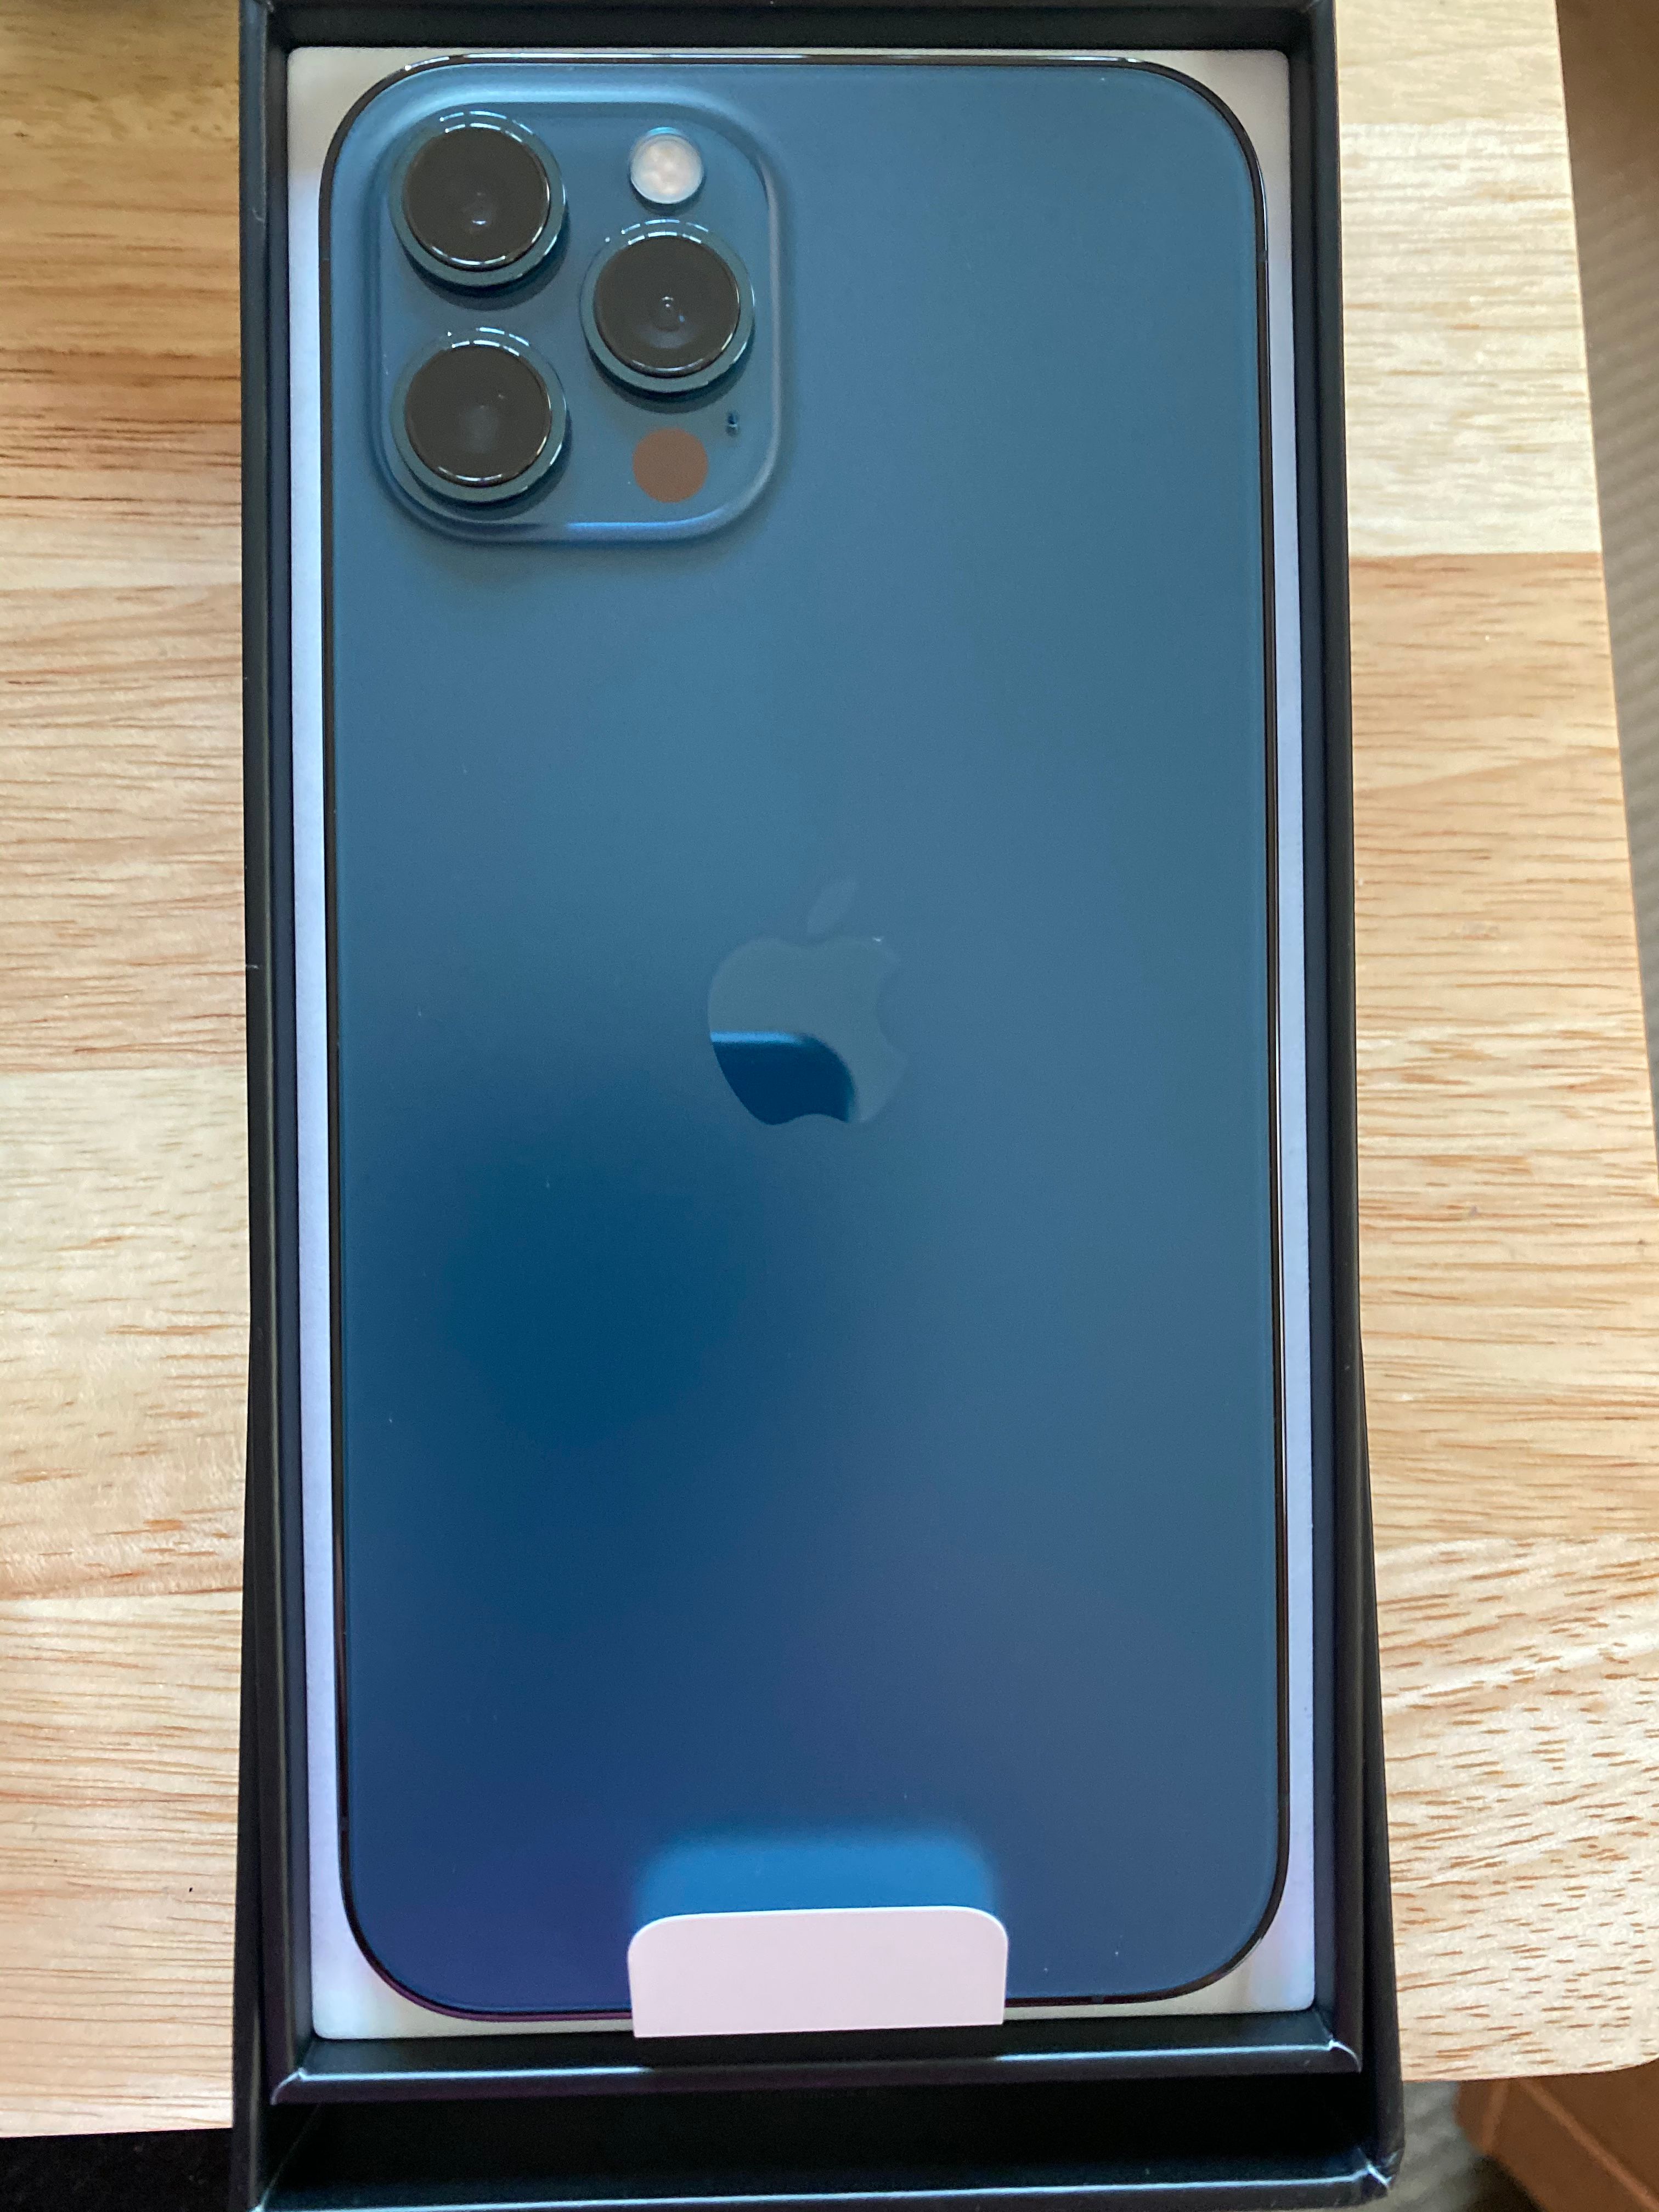 Iphone 13 Pro Max - Apple iPhone 13 Pro Max Price in India January 2021